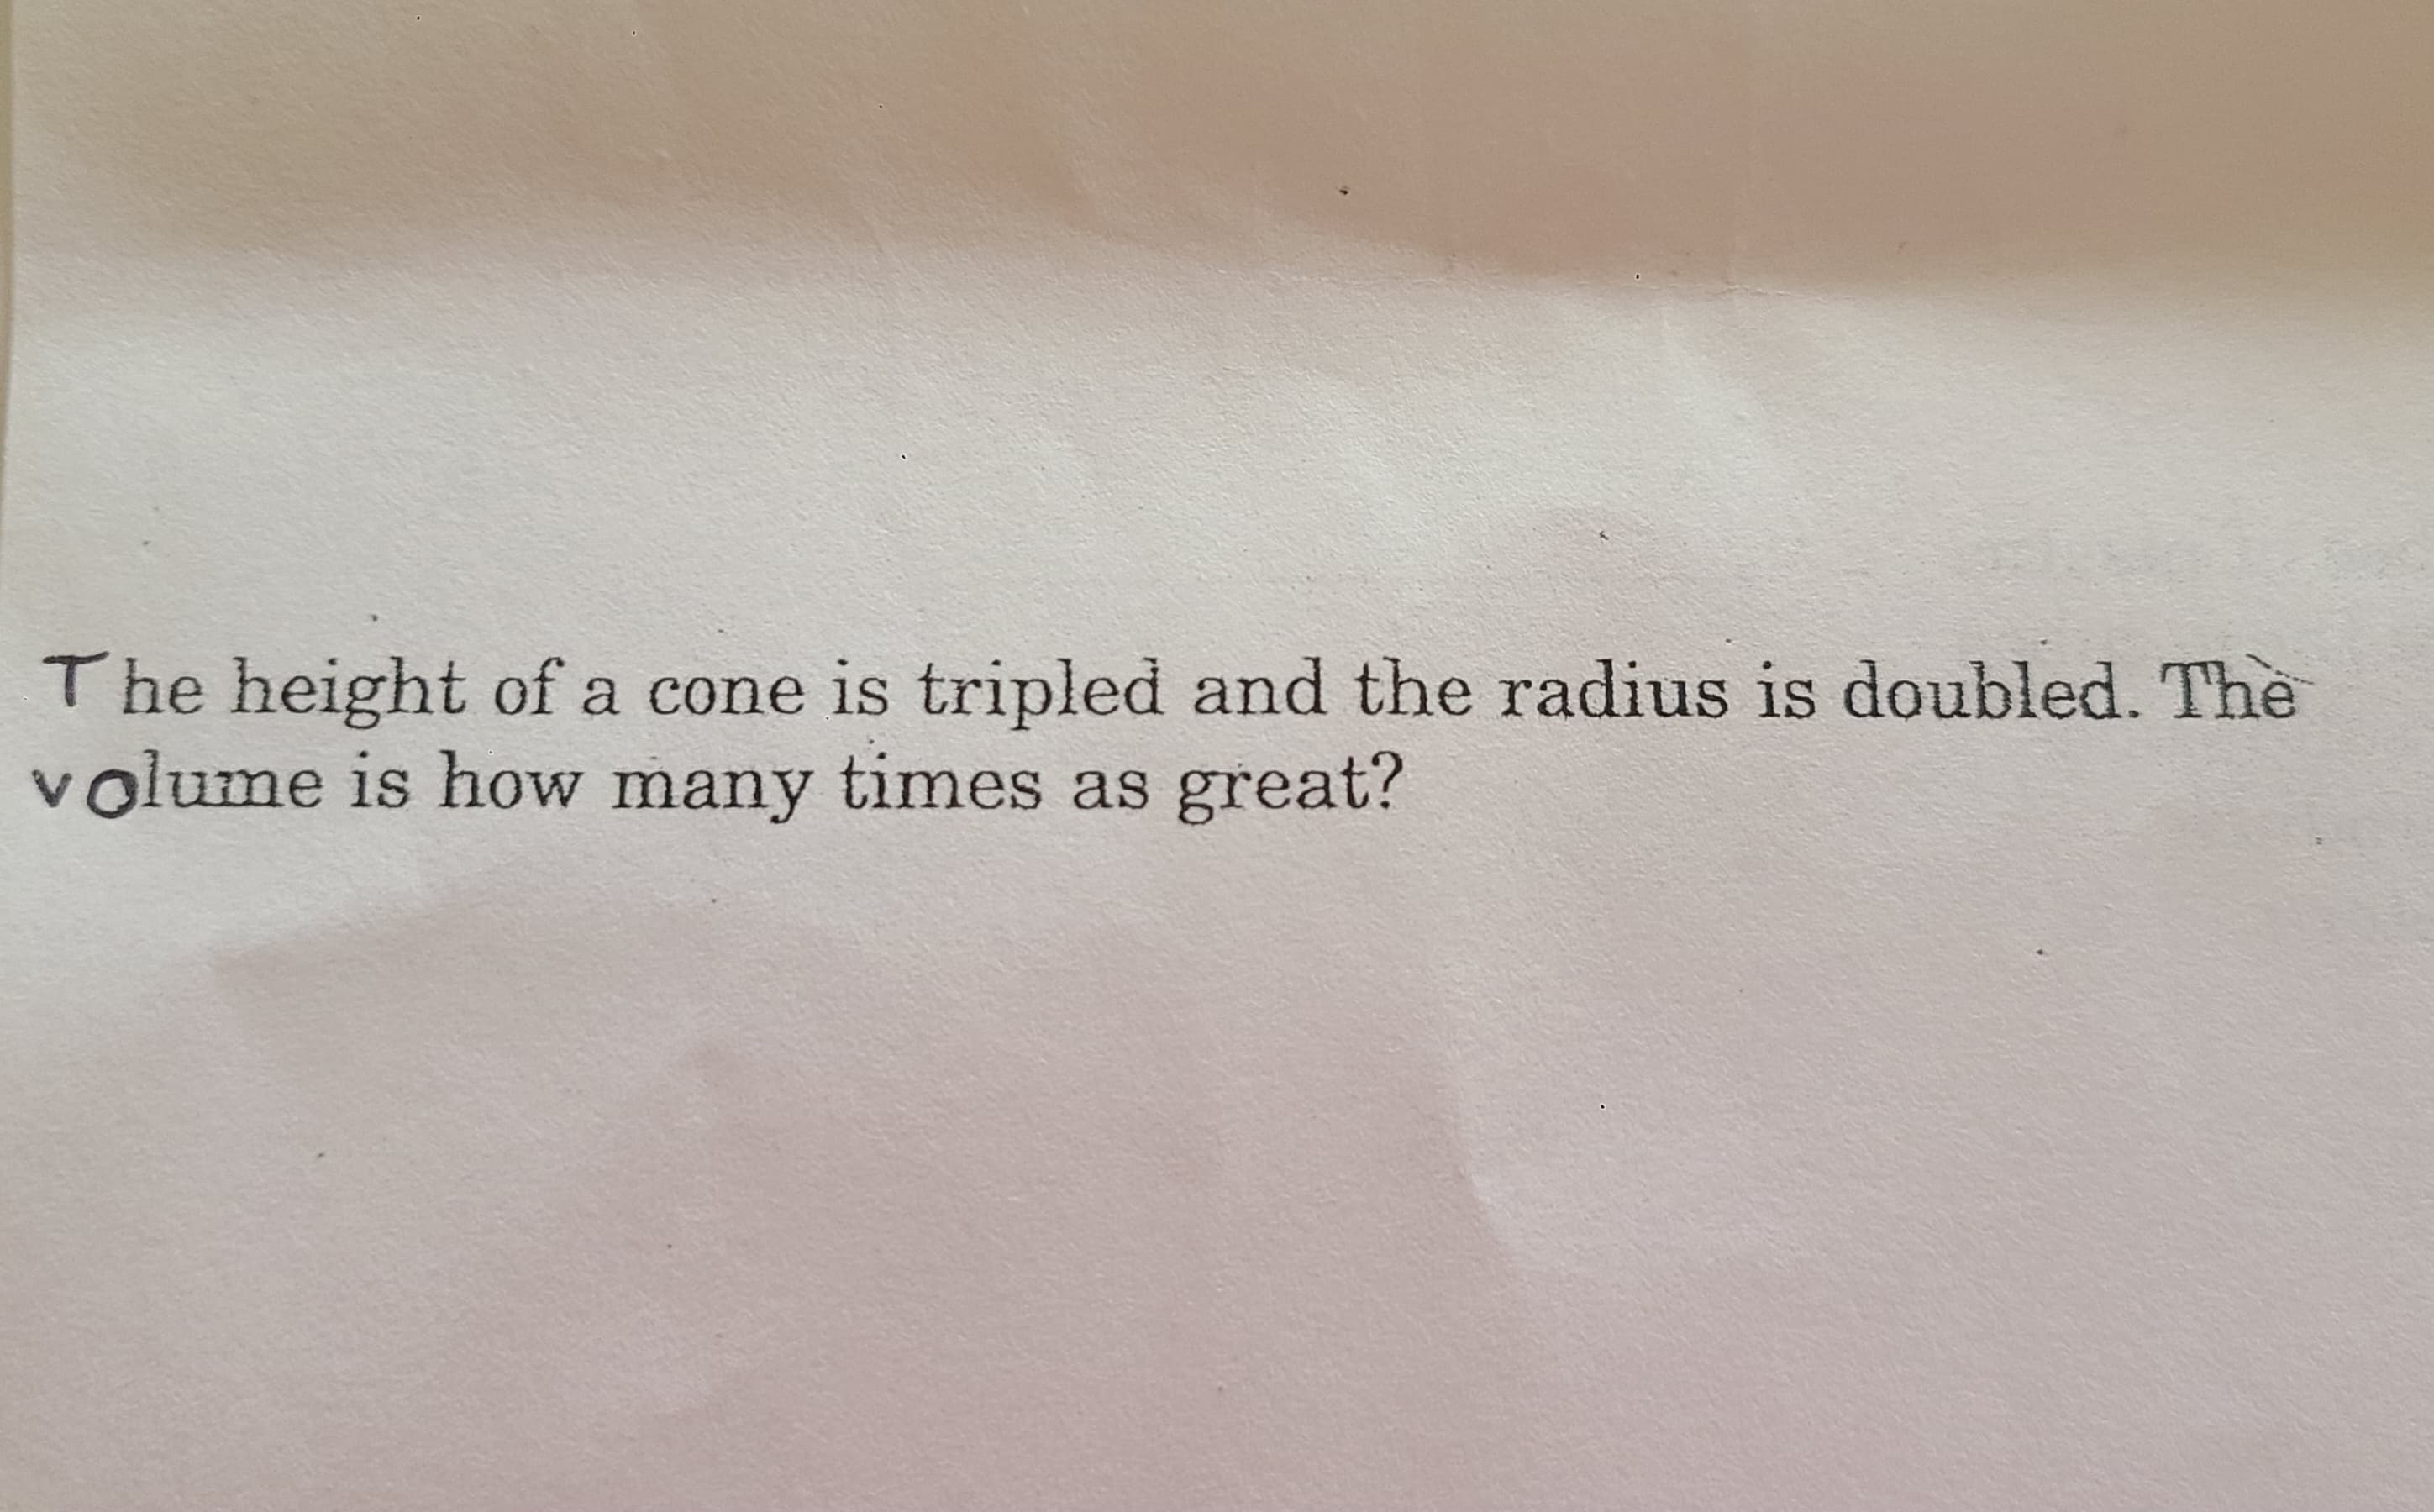 The height of a cone is tripled and the radius is doubled. The
volume is how many times as great?